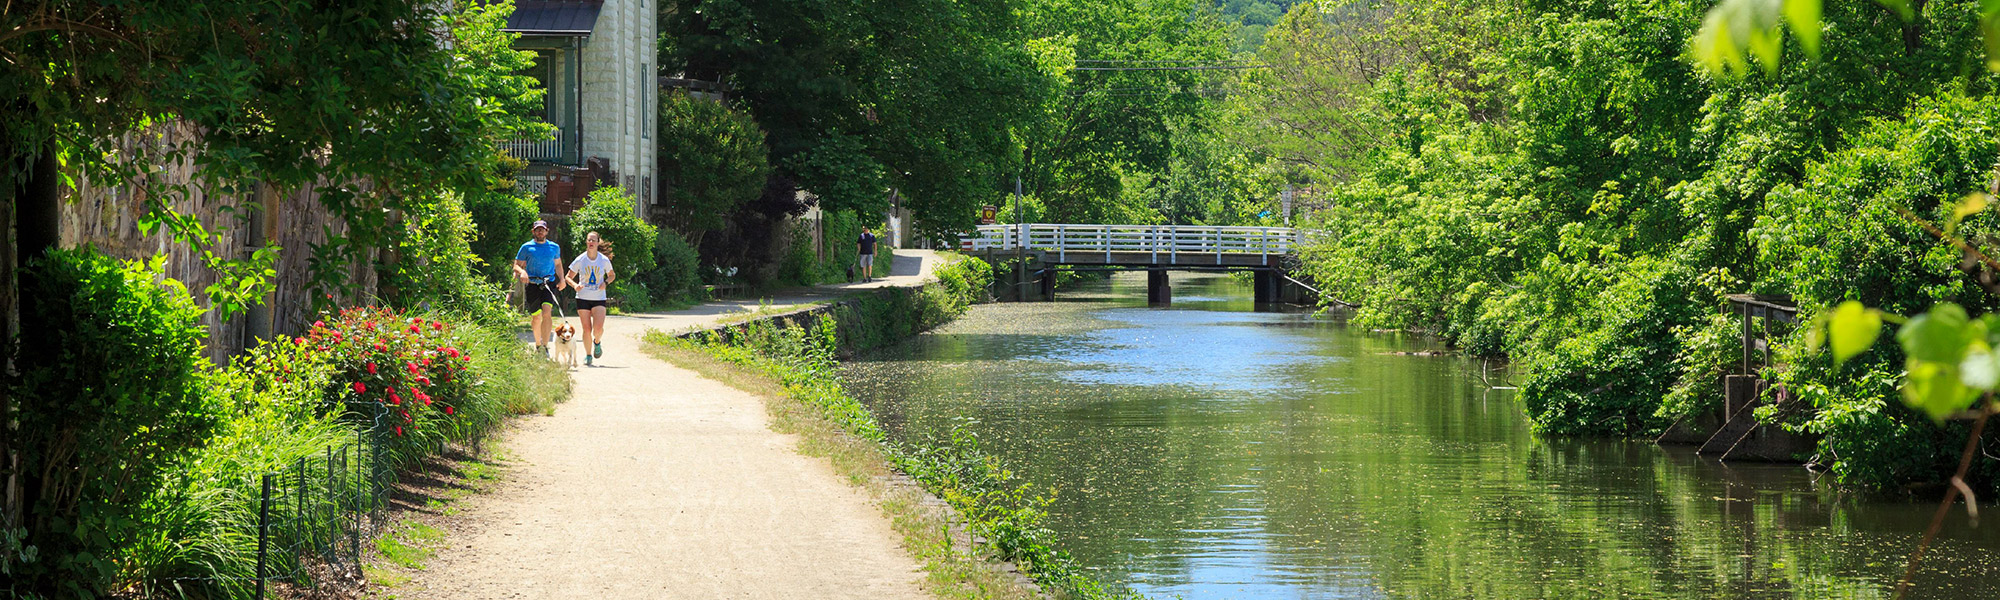 Photo of the Delaware and Raritan Canal